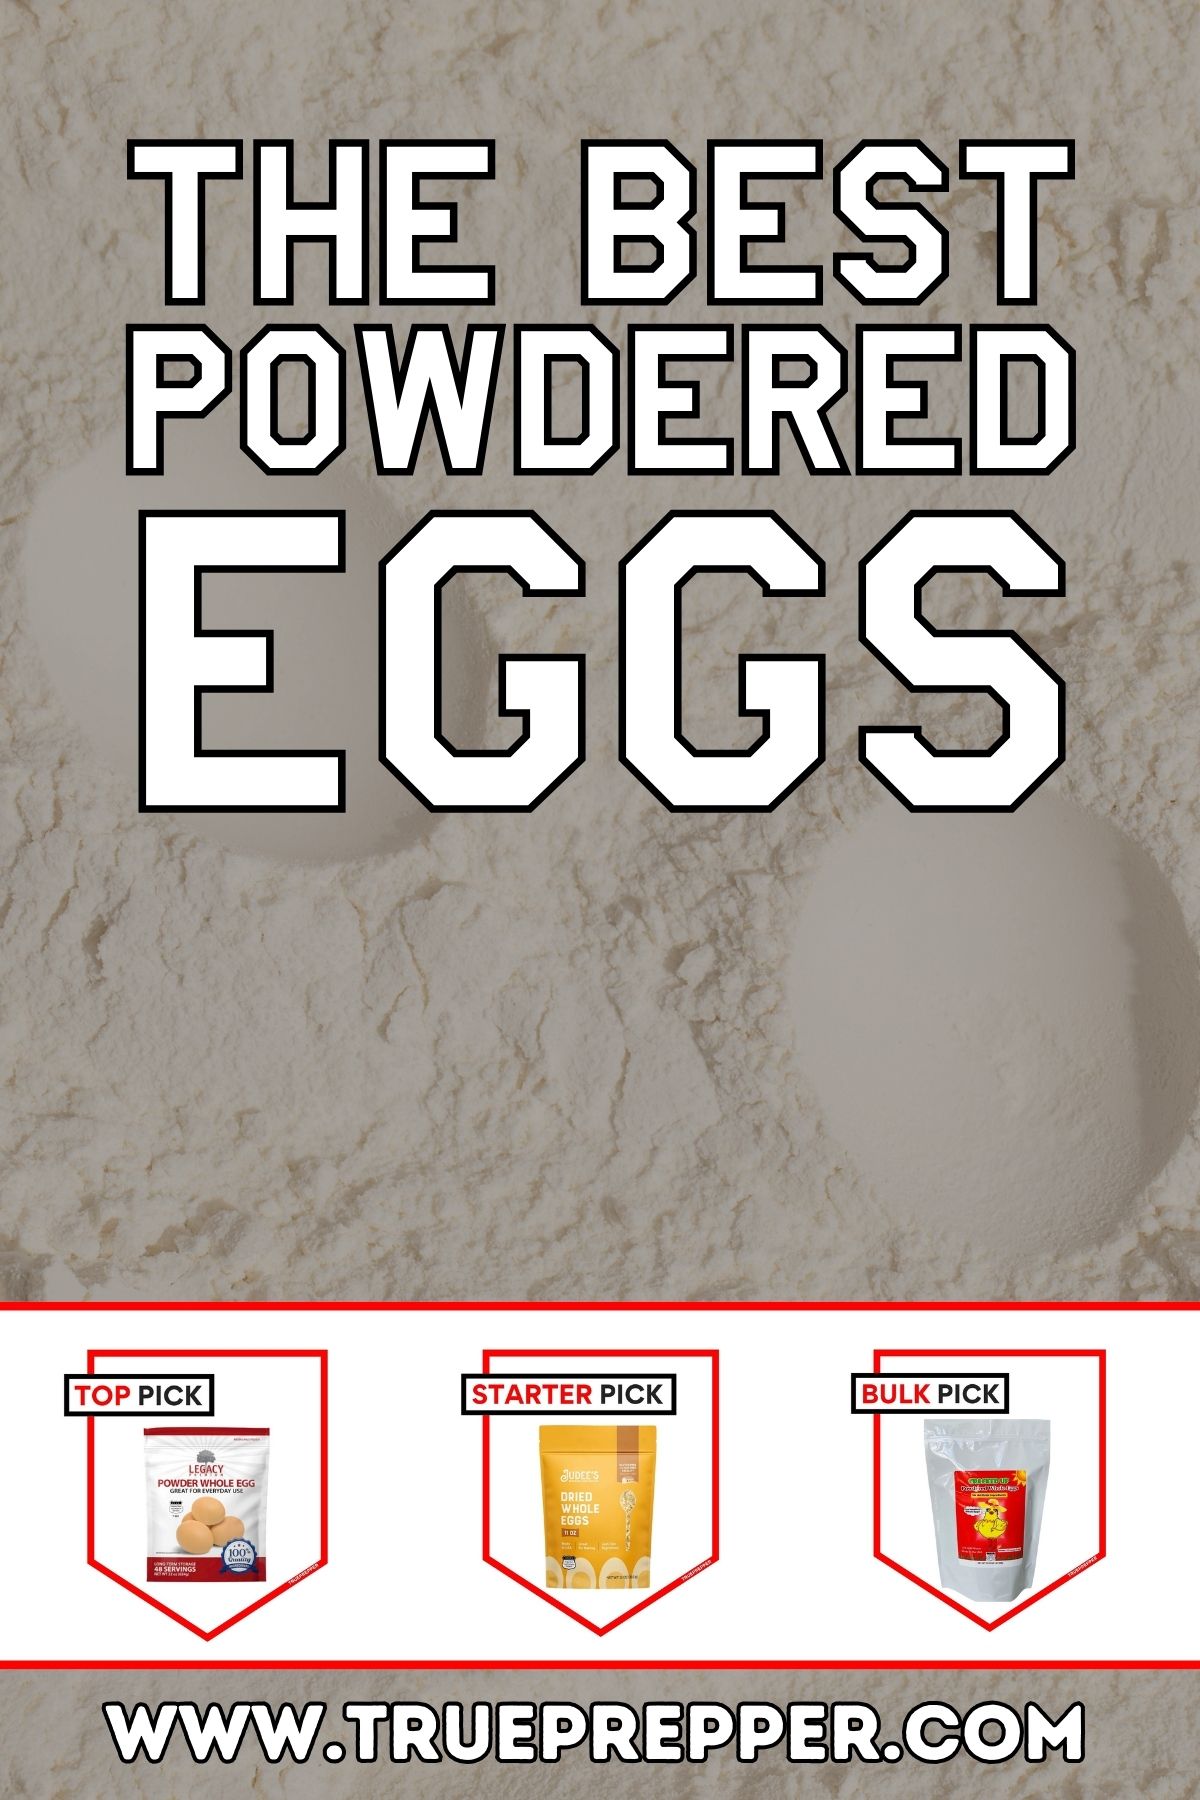 The Best Powdered Eggs